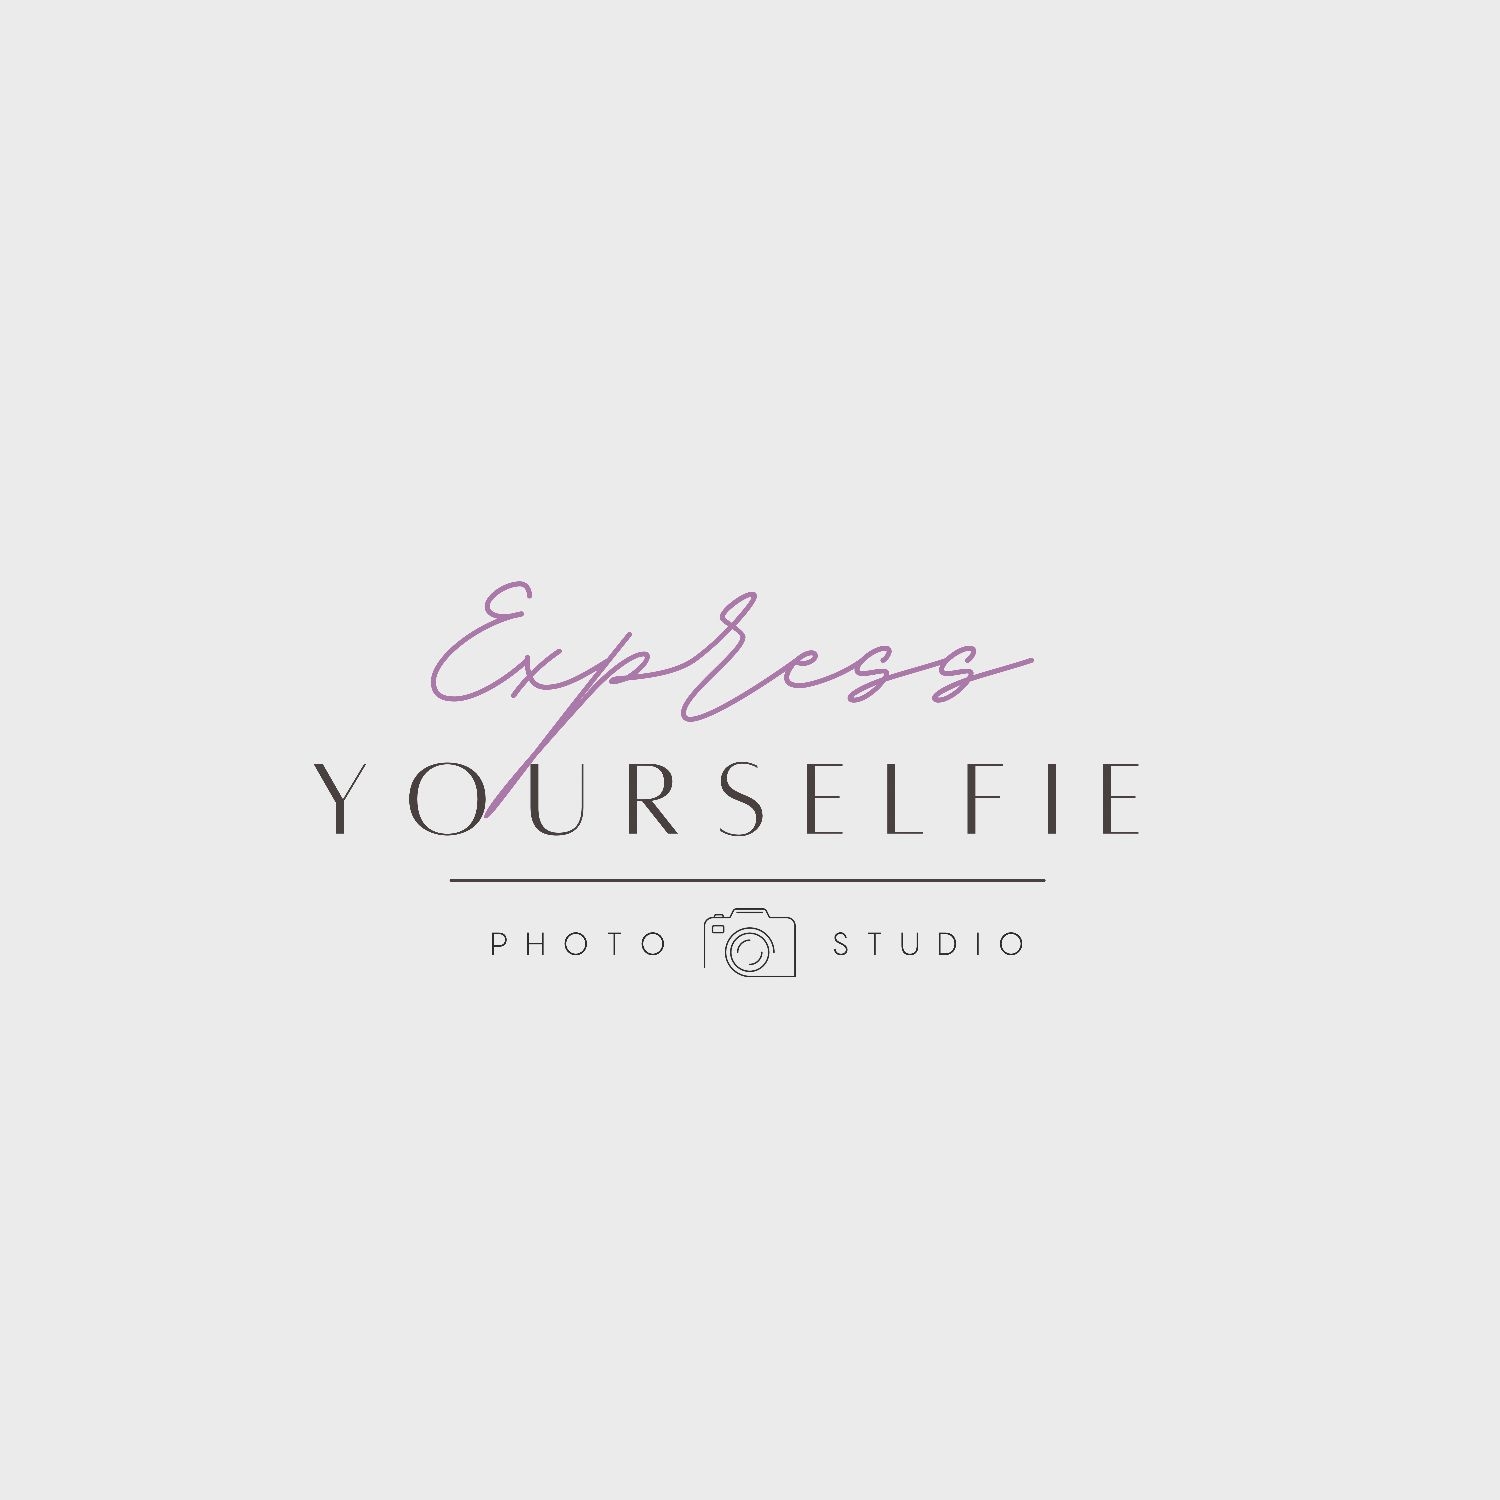 Business logo of Express YourSelfie